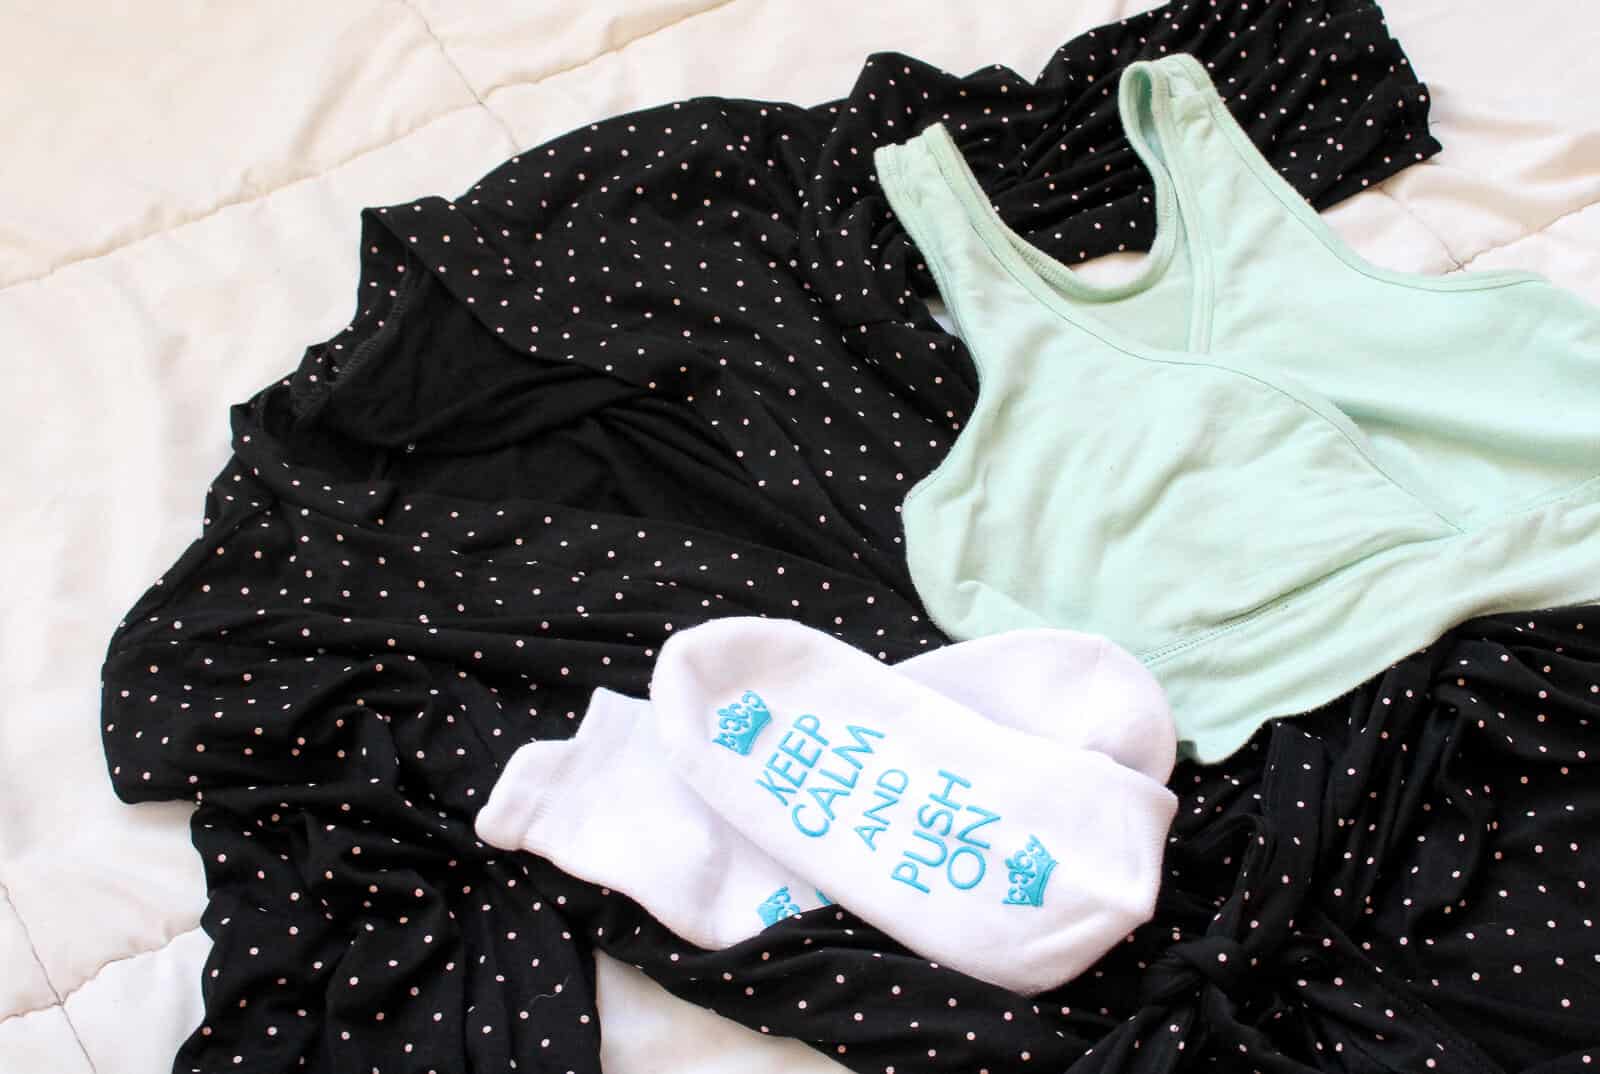 Keep calm and push on hospital socks on top of maternity clothes.